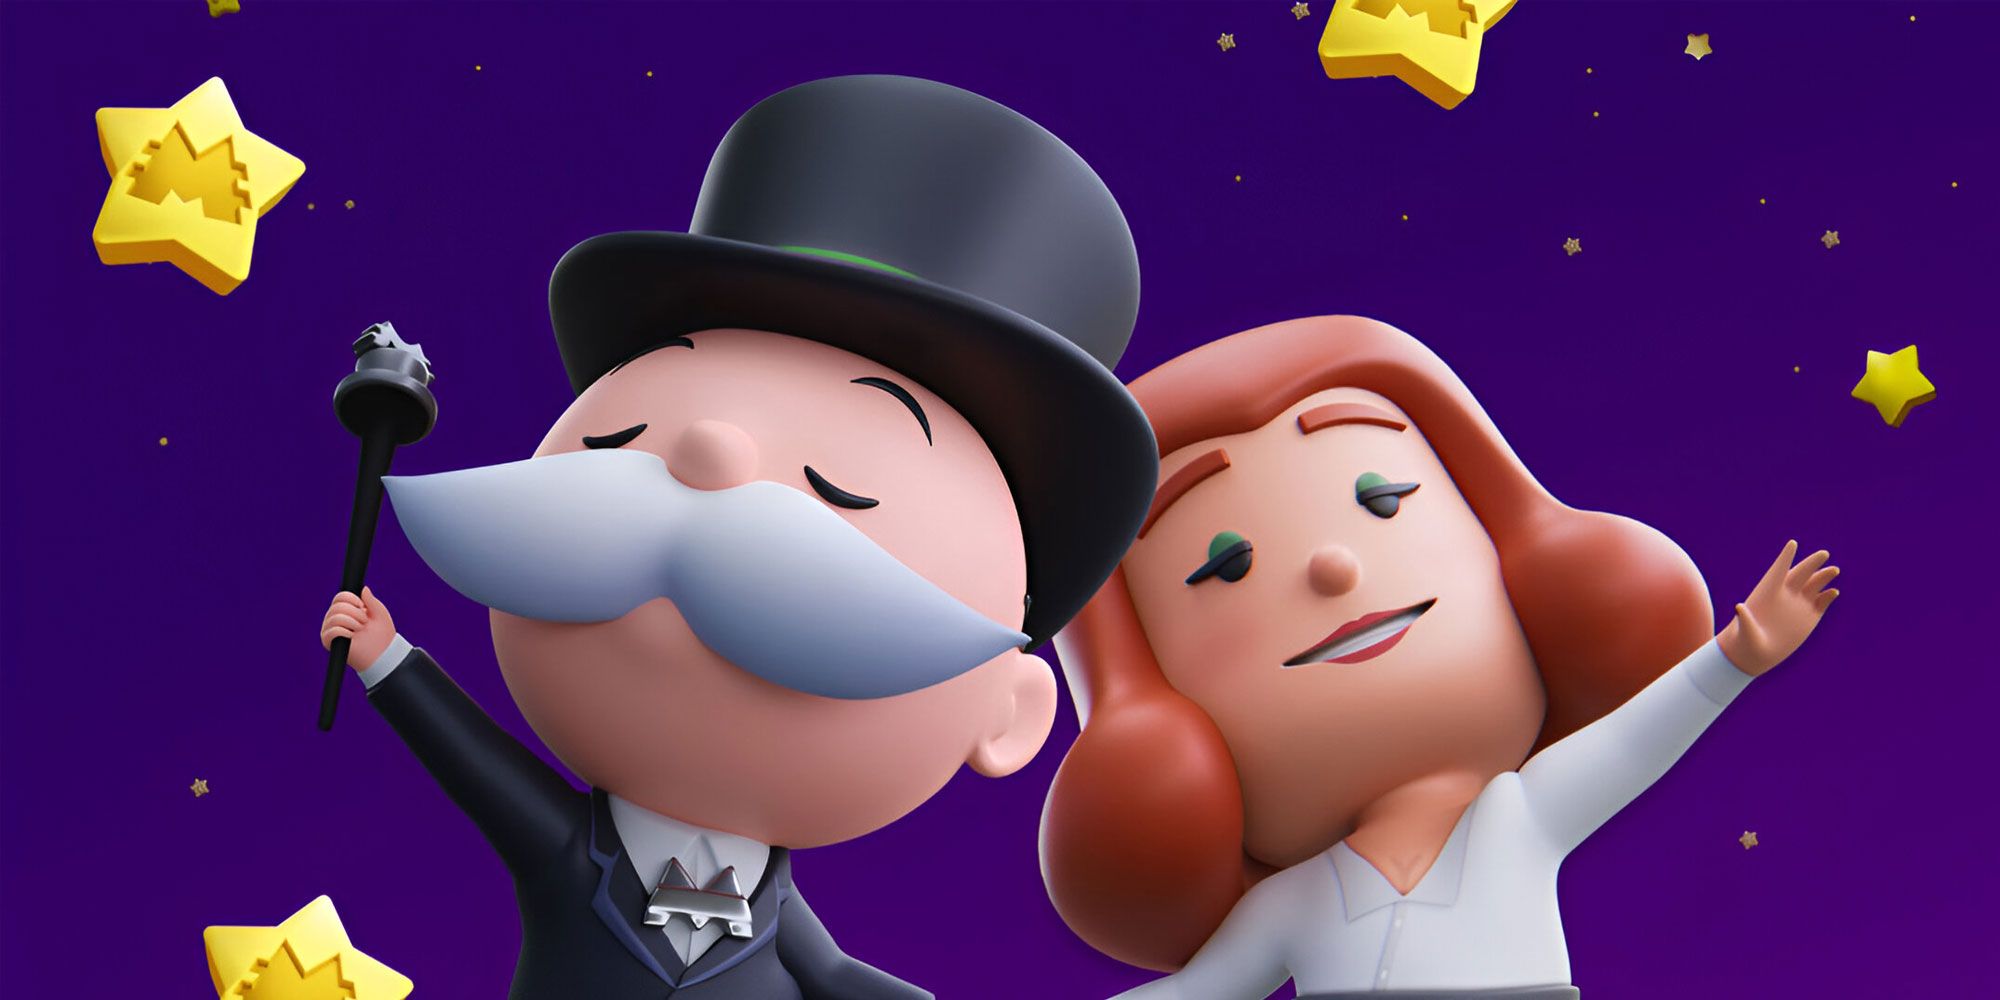 Mr. Monopoly holding hands with another character from Monopoly GO! with a beautiful purple sky full of stars in the background.